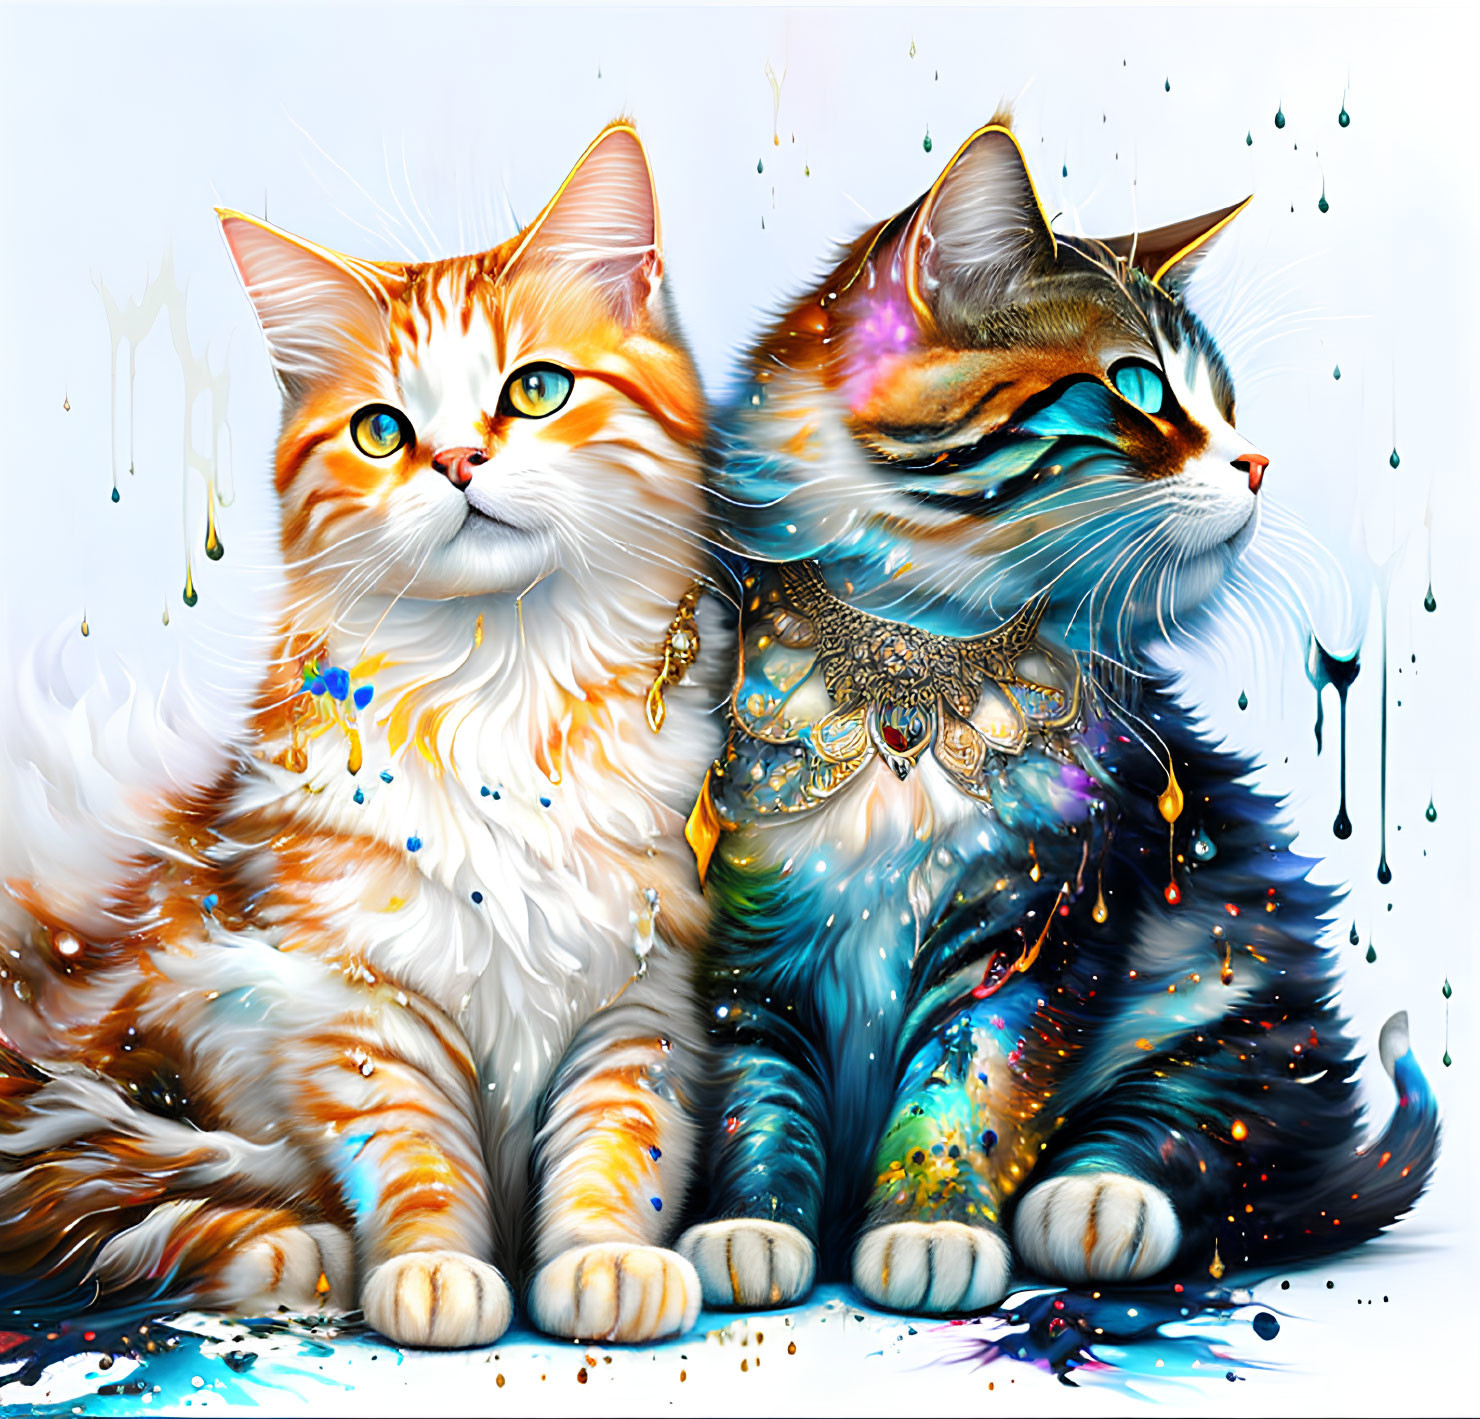 Vibrantly colored artistic renderings of cats with intricate patterns and jewelry on white backdrop